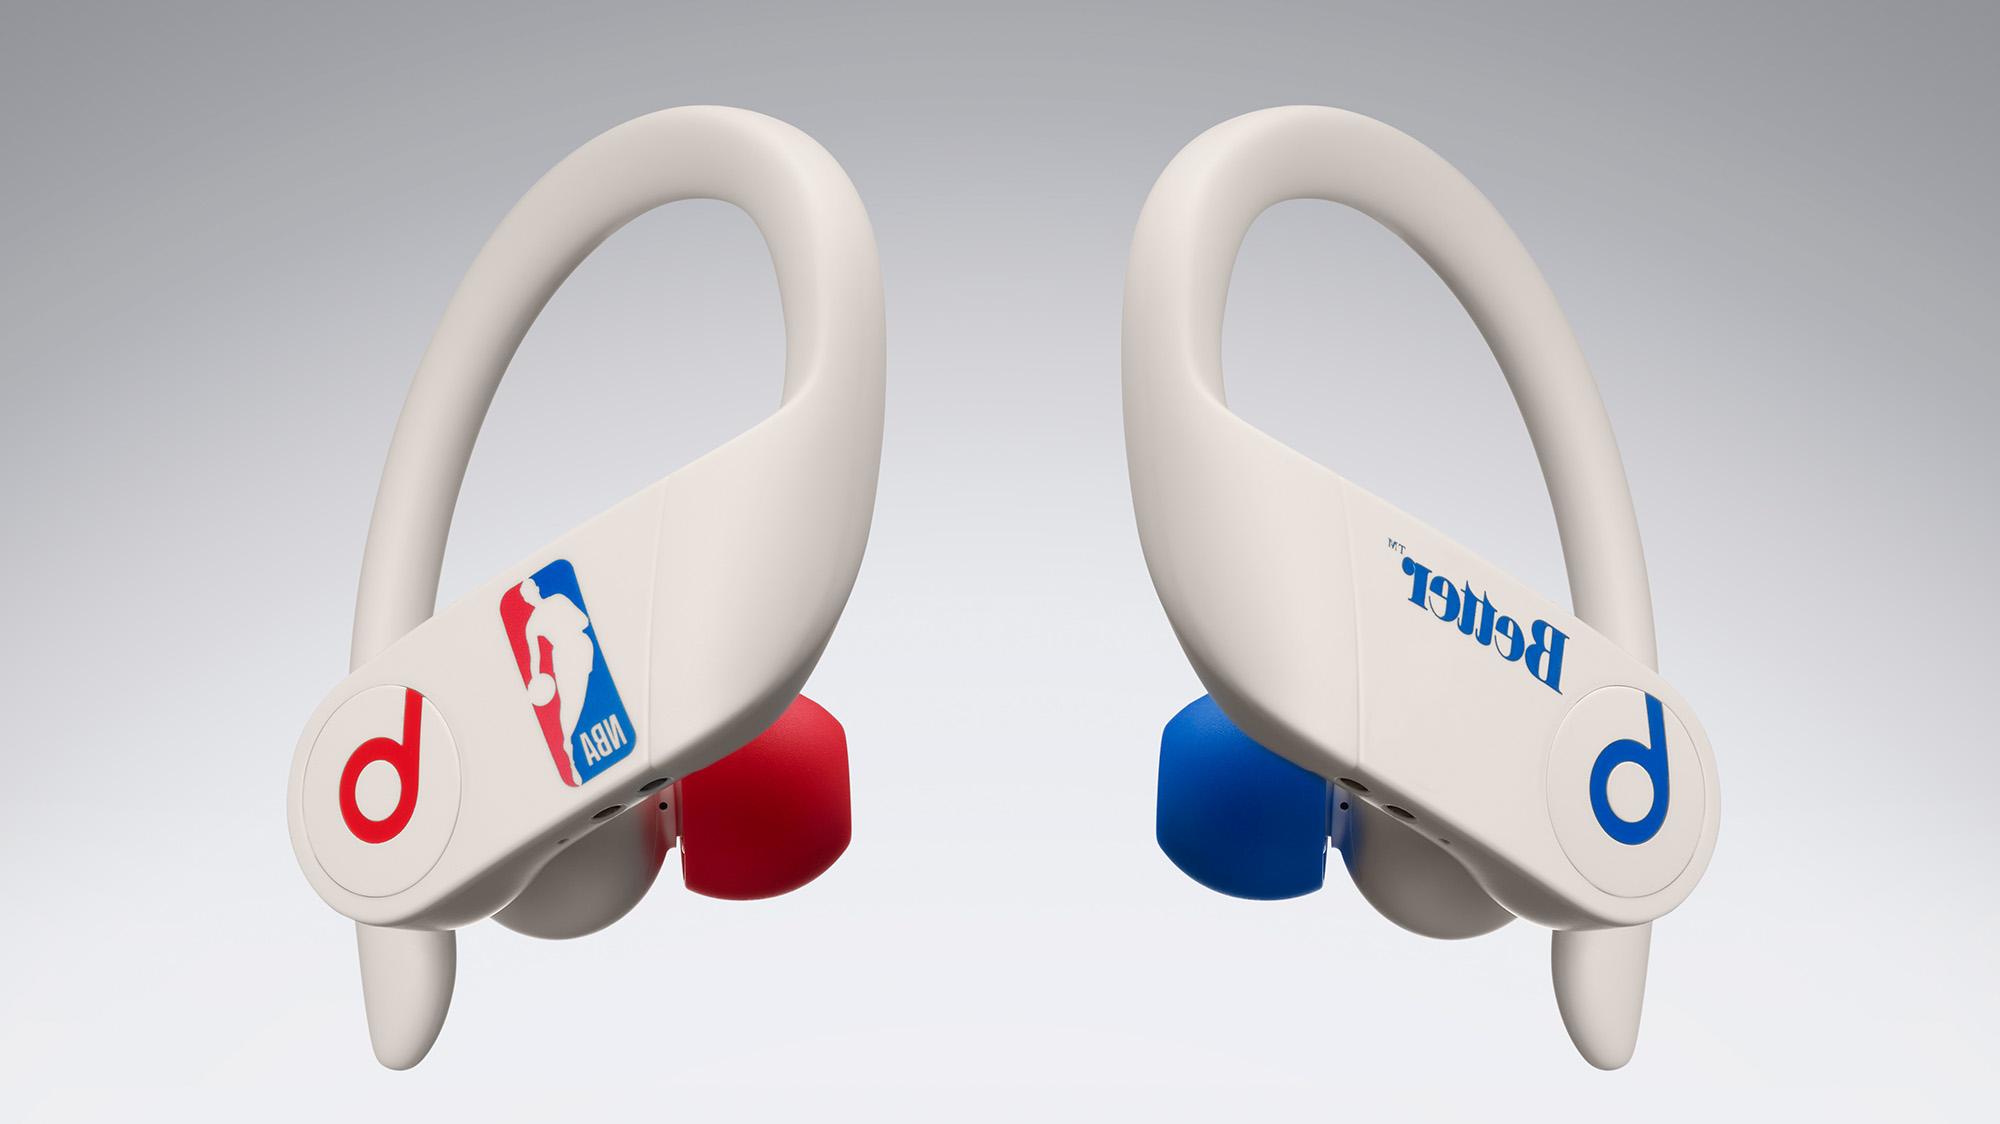 For NBA fans: Apple introduced a special version of Powerbeats Pro